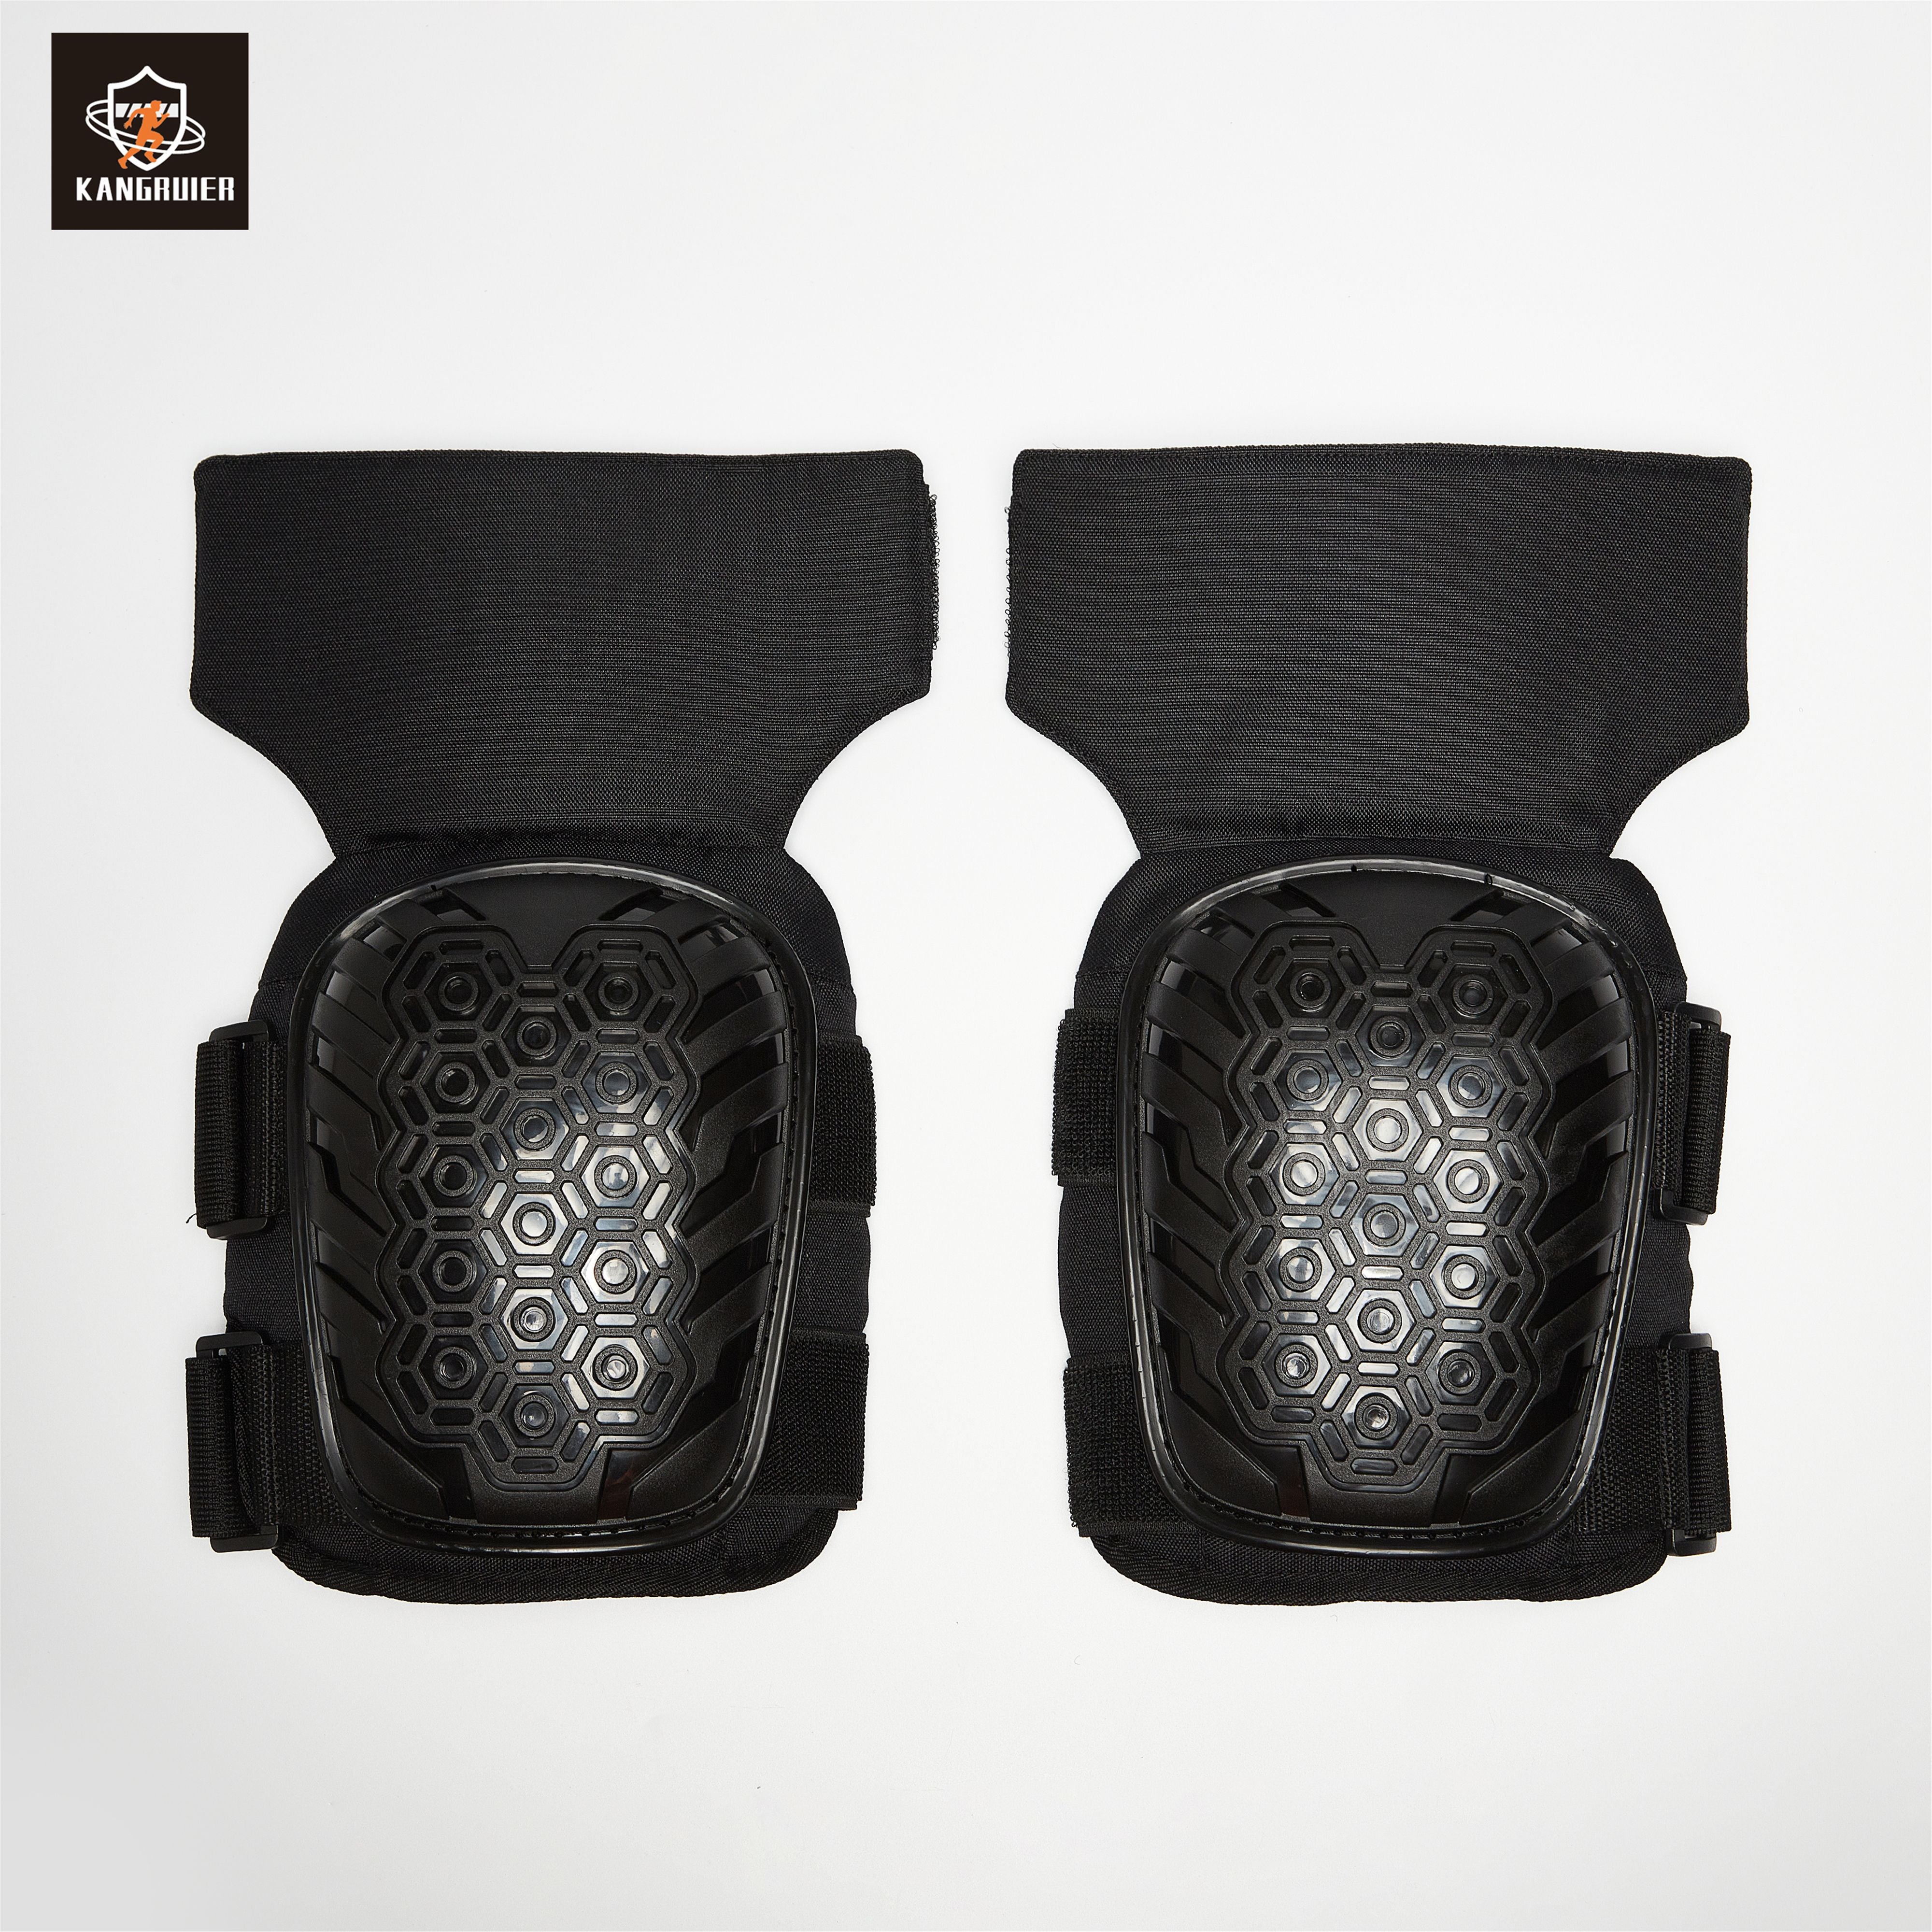 Knee Pads for Work Protection, Gardening, Cleaning,Construction, Flooring, Thick Foam Cushion